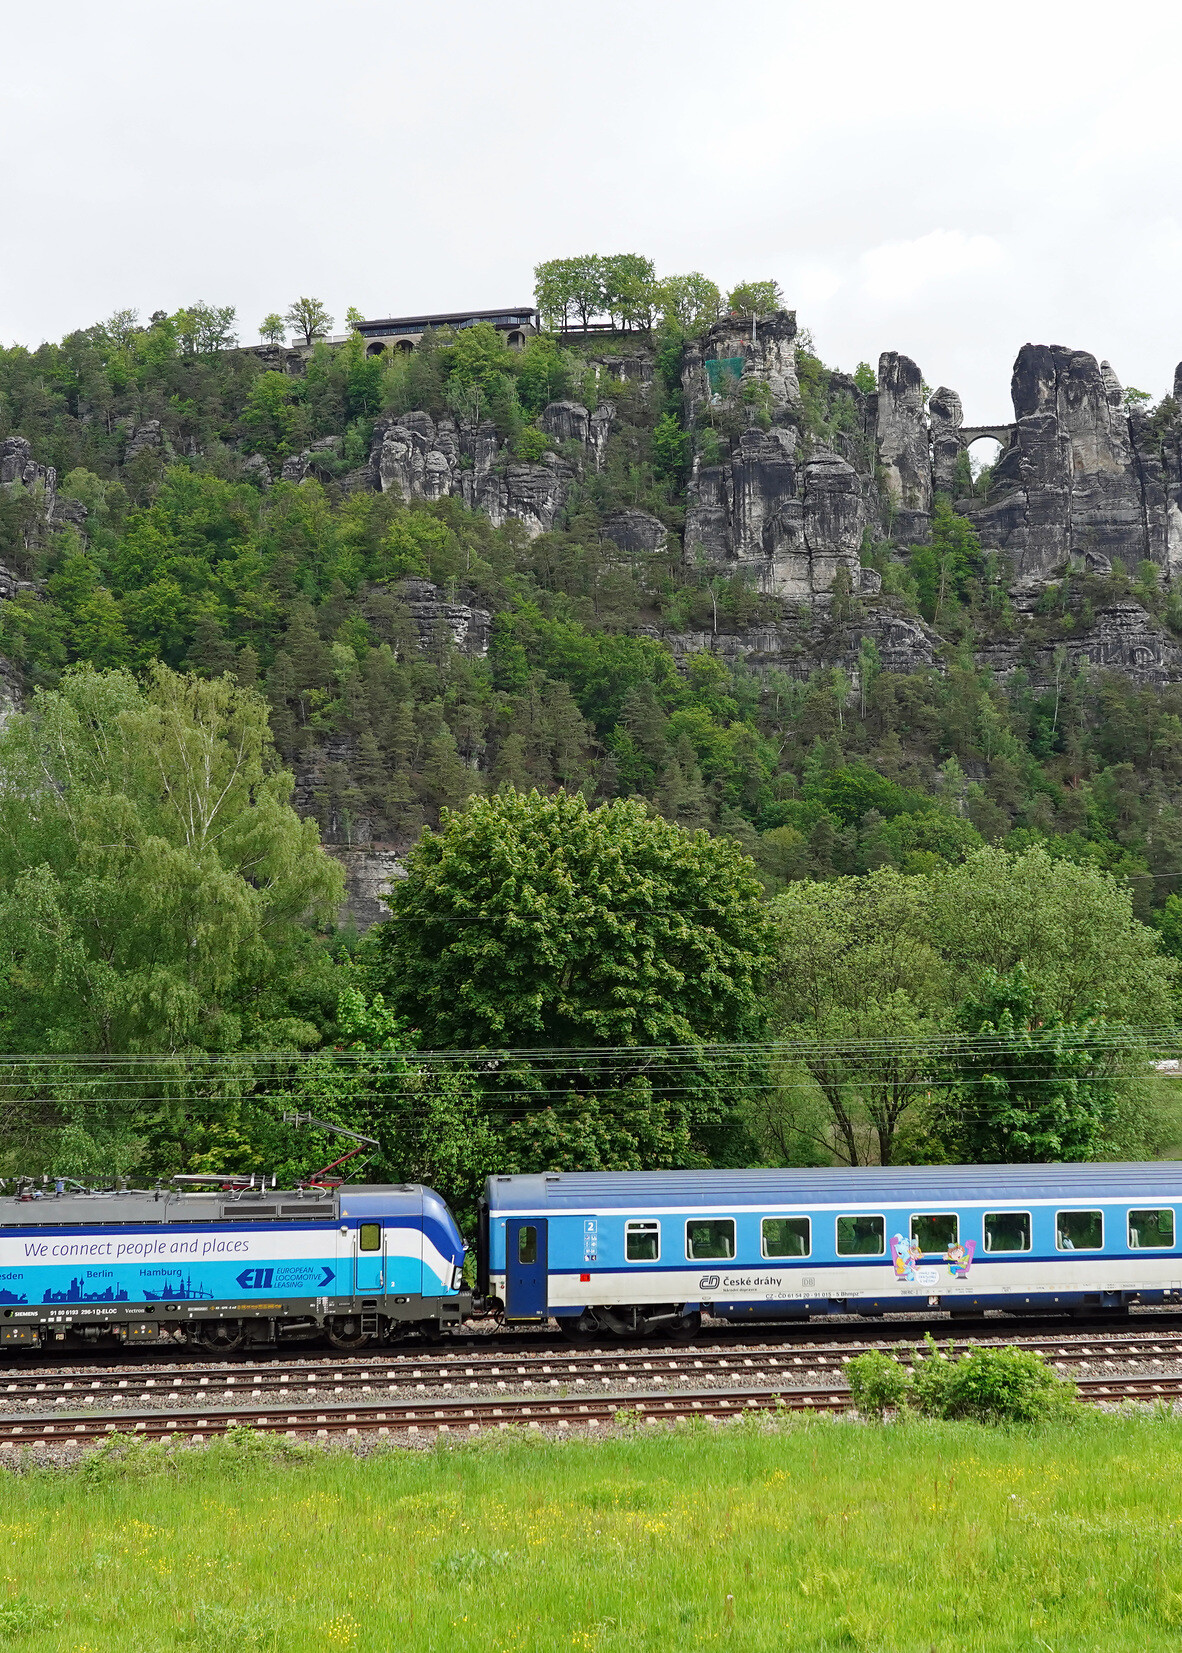 Czech blue passenger train runs on rails, surrounded by meadows and trees, in front of the mountains of Saxon Switzerland.